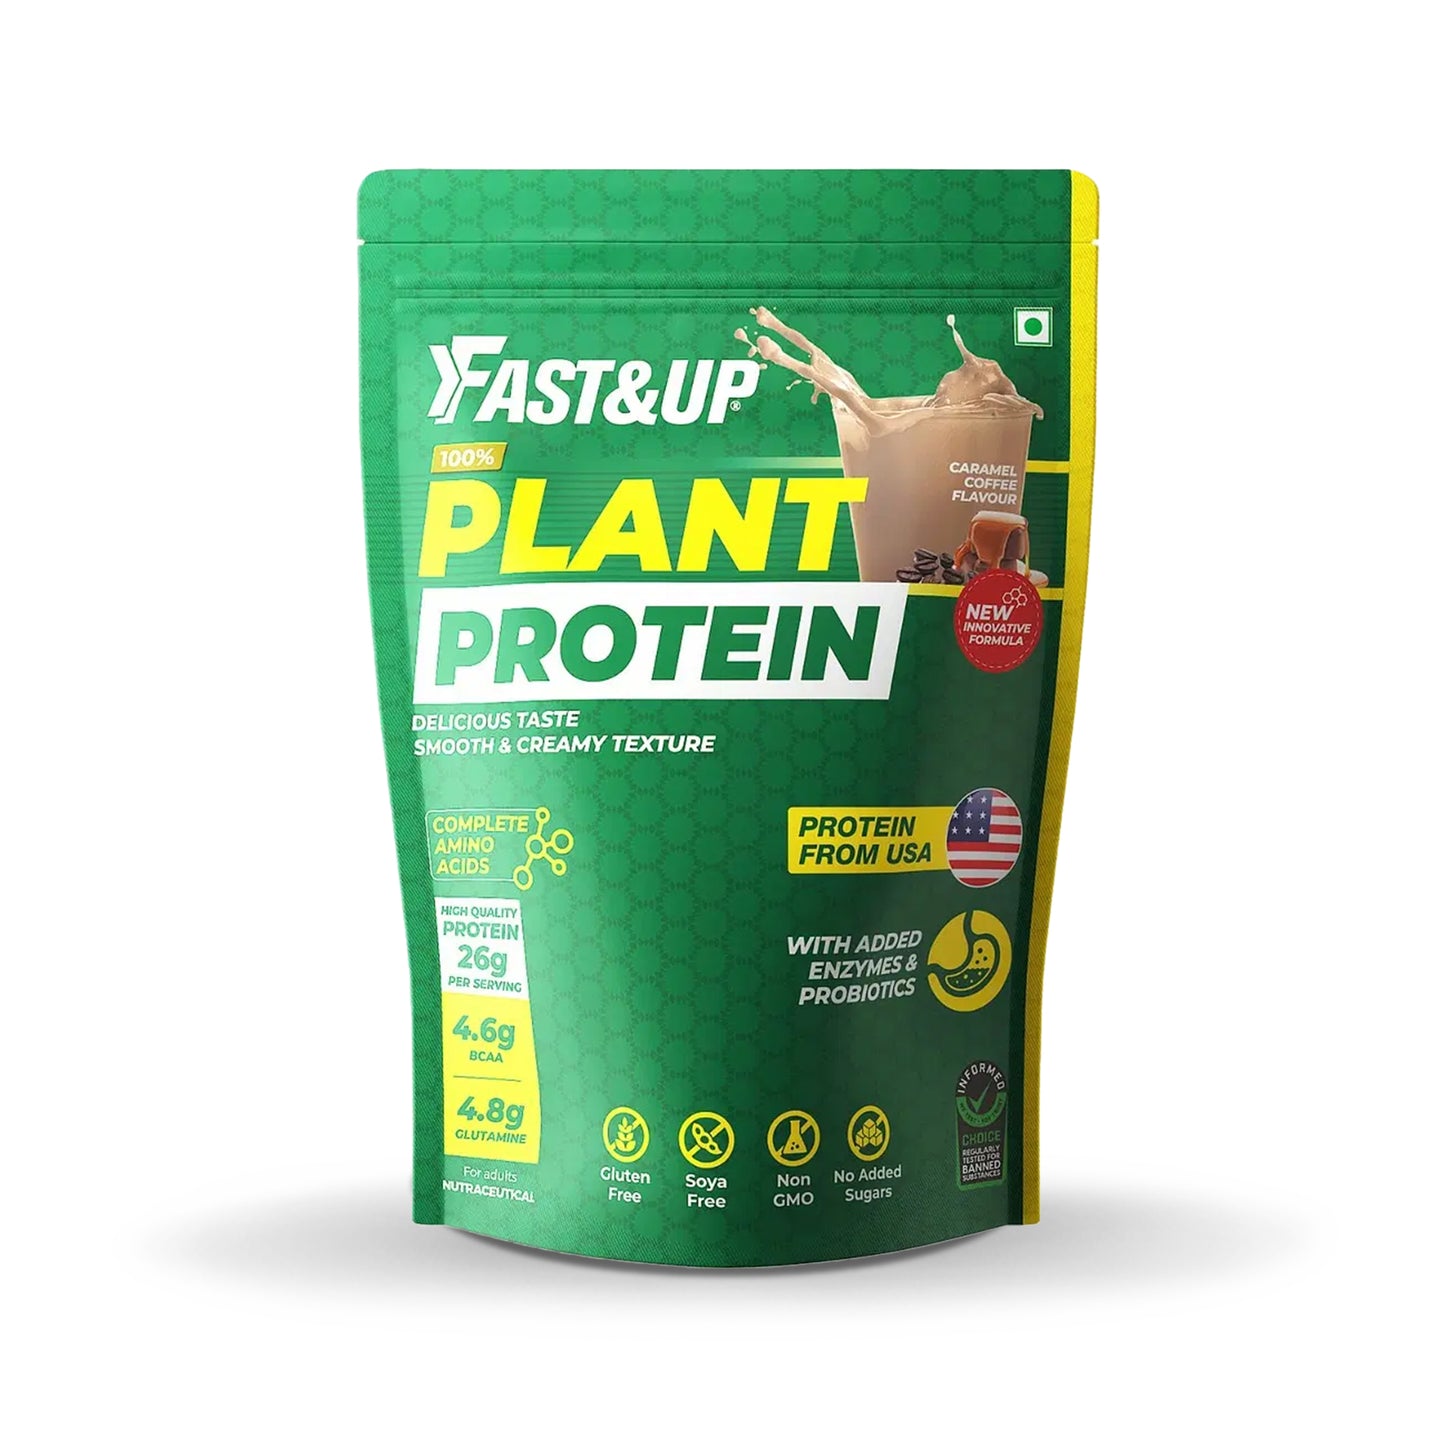 Fast&Up Organic Plant Protein Caramel Coffee, 30 Servings